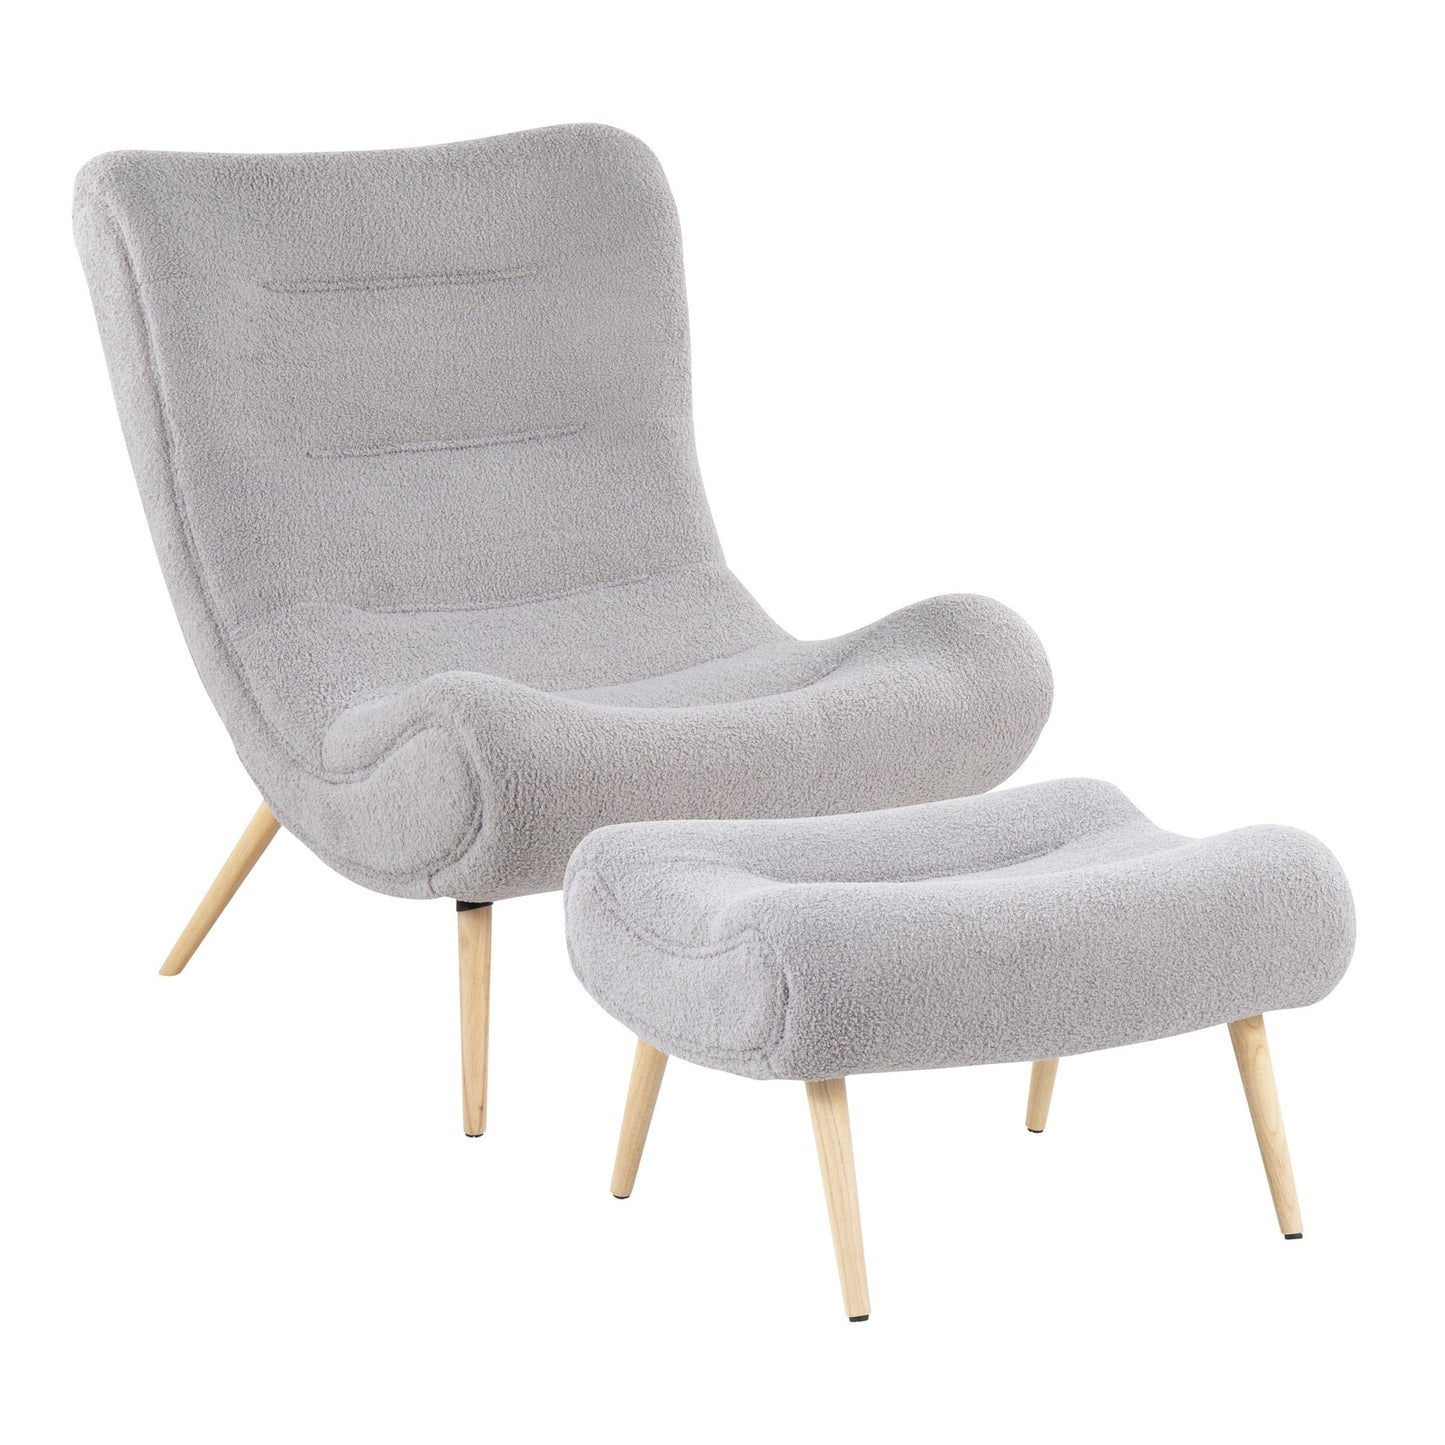 CLOUD CHAIR NATURAL WOOD + GRE